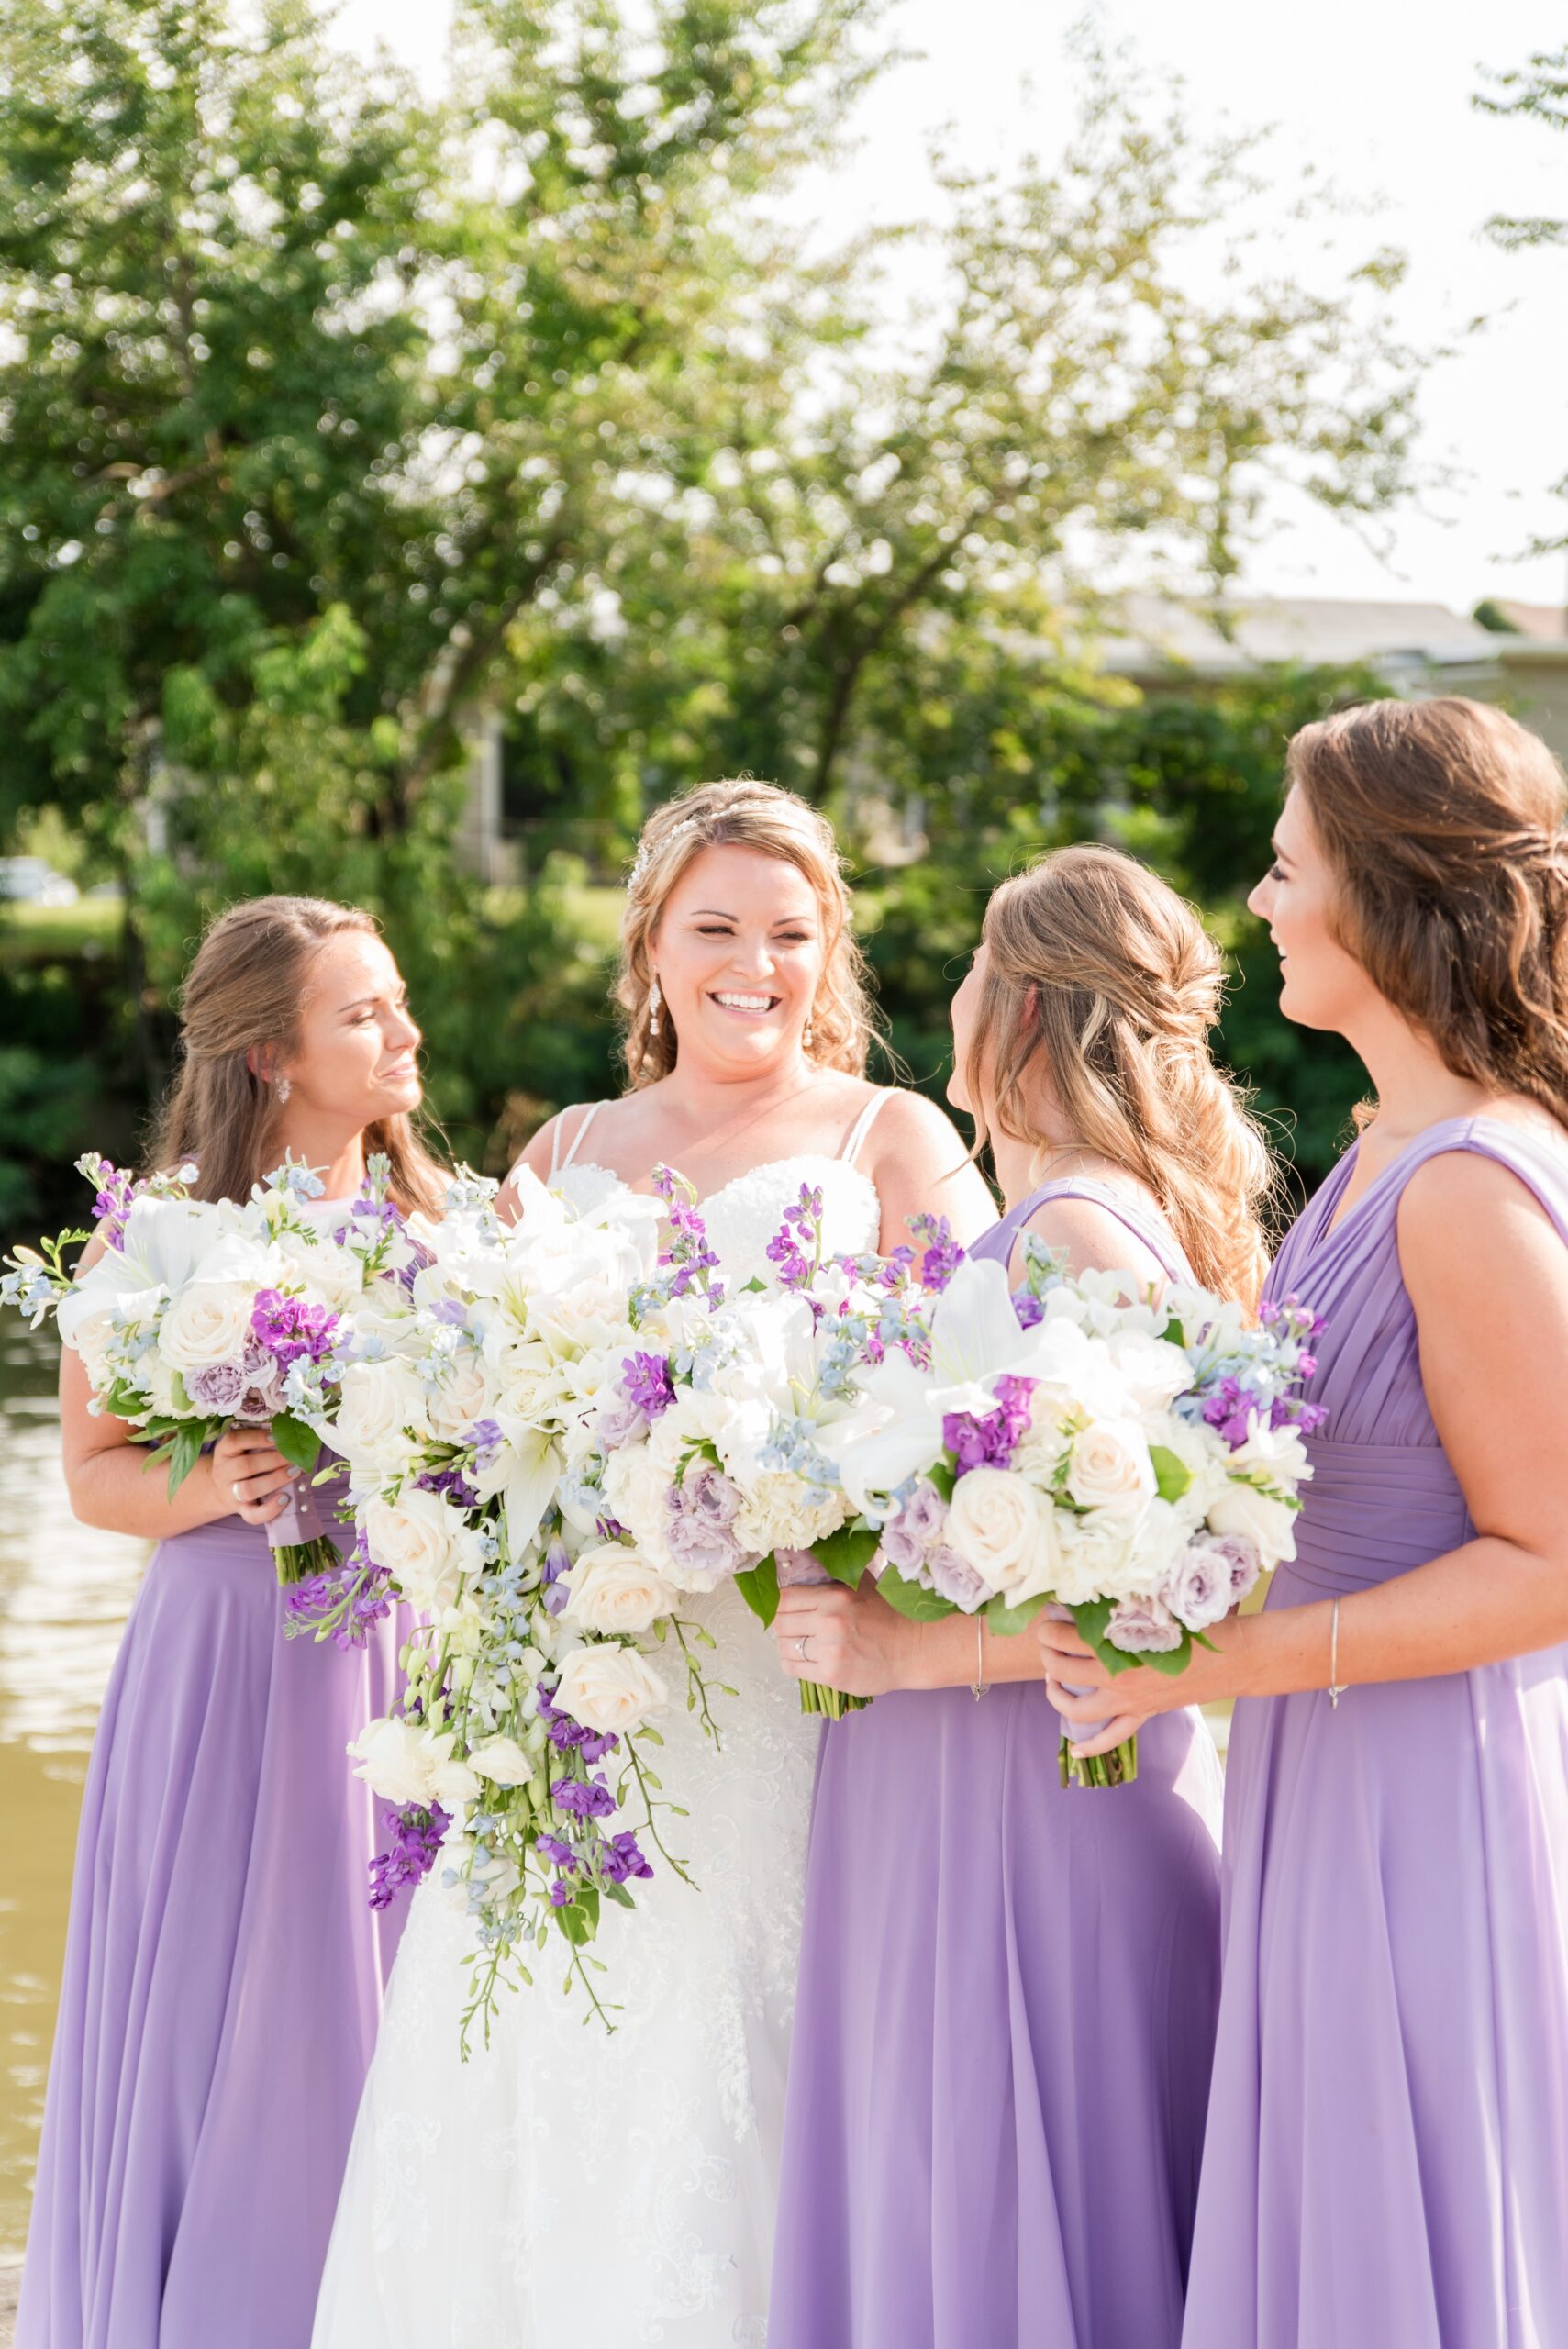 A bride laughs while standing on a dock with her bridesmaids in purple dresses